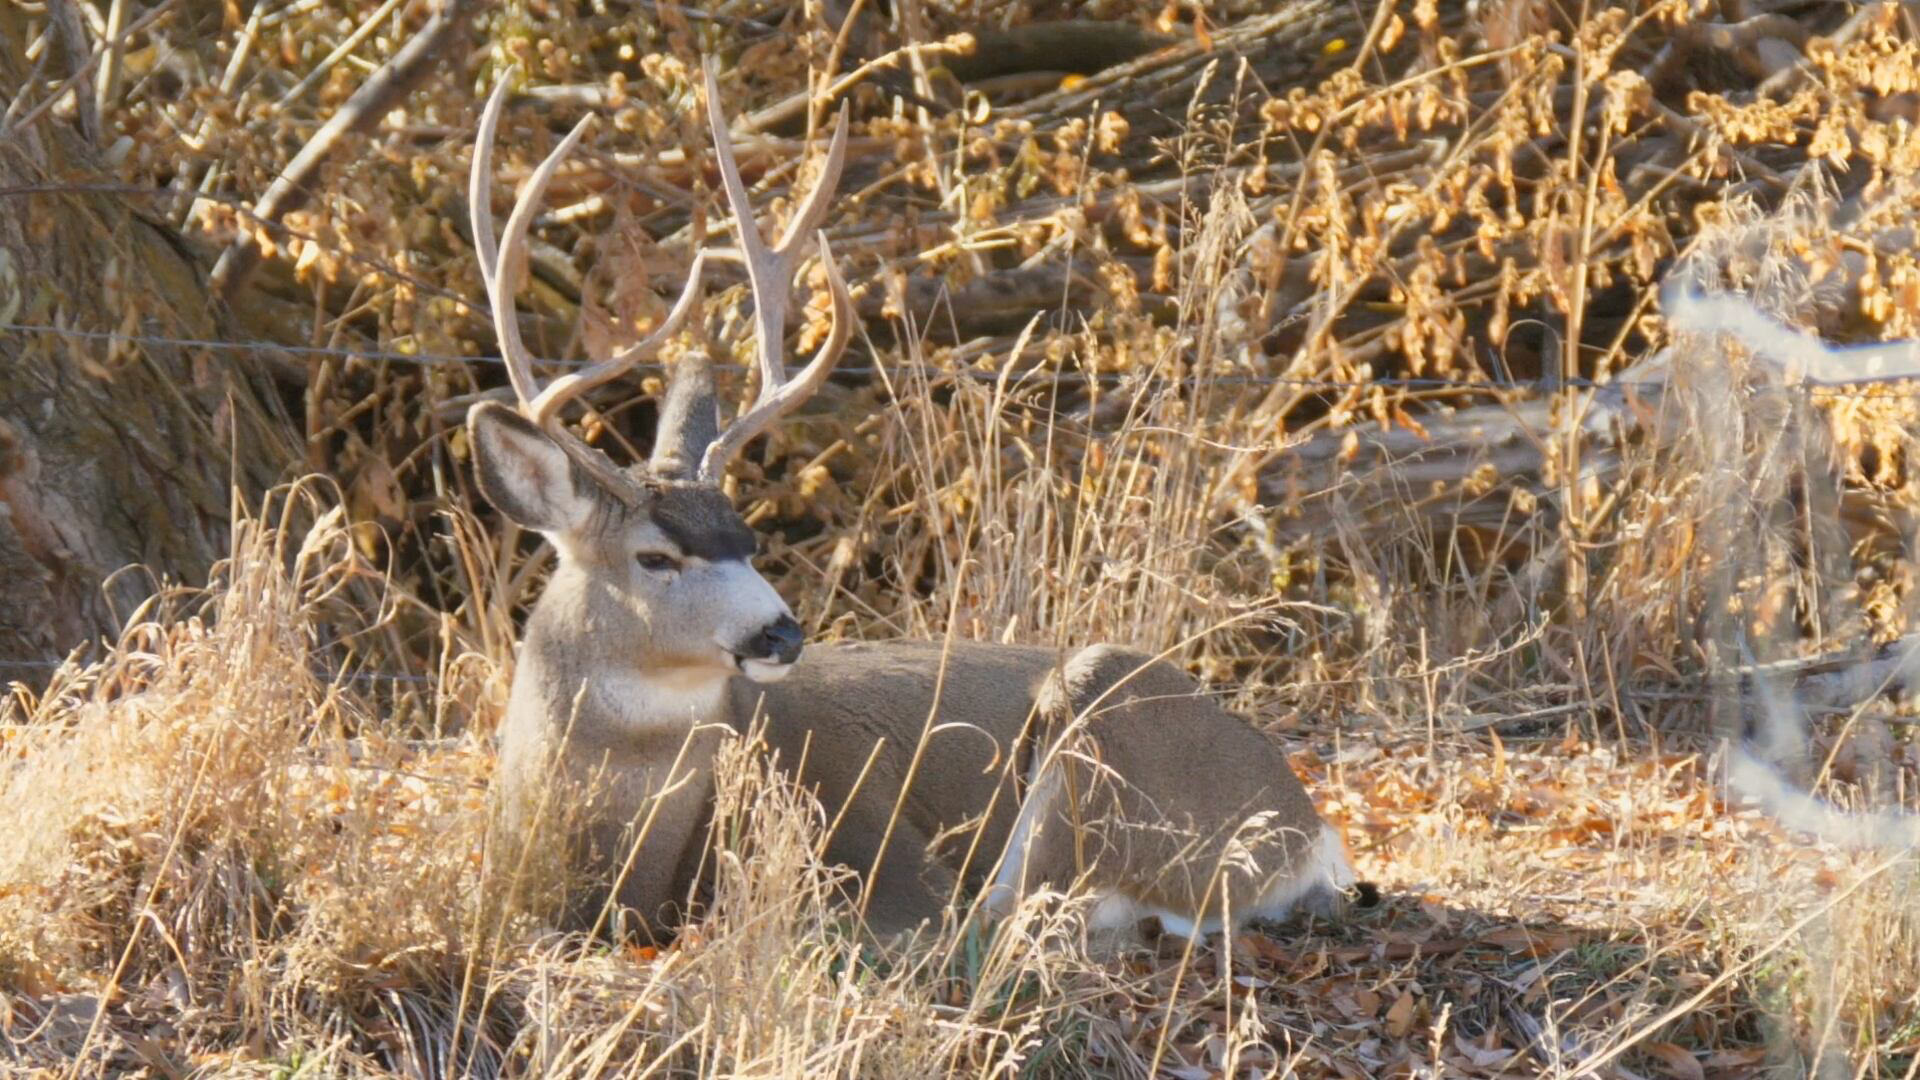 Local hunters want to keep rights after Chronic Wasting Disease arrives ...